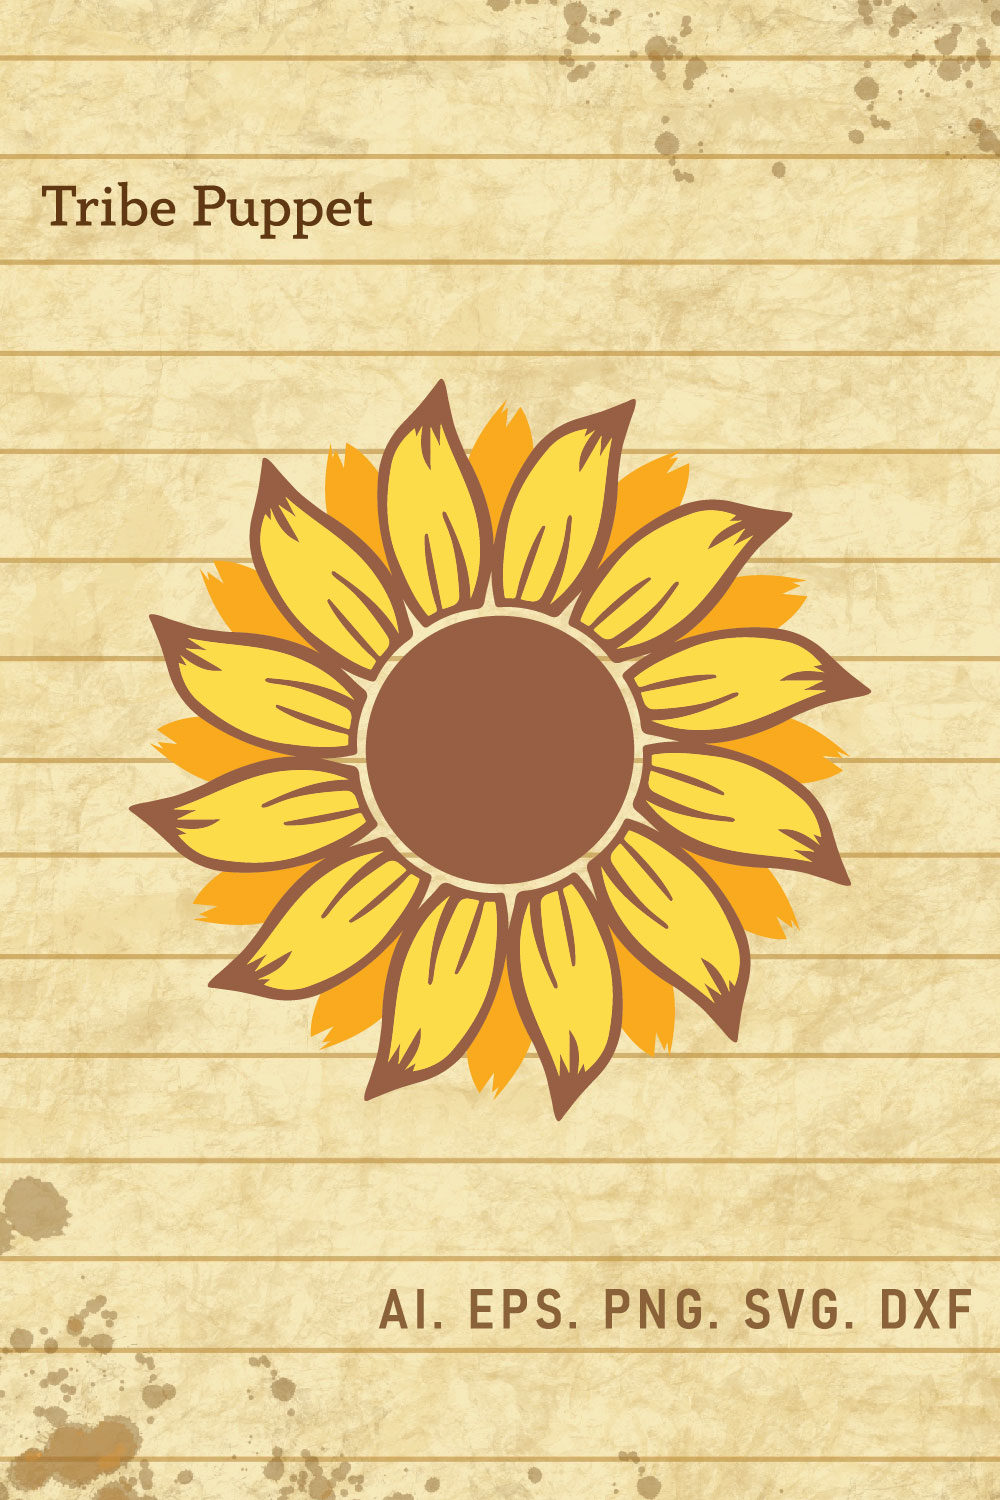 Sunflower 8 pinterest preview image.